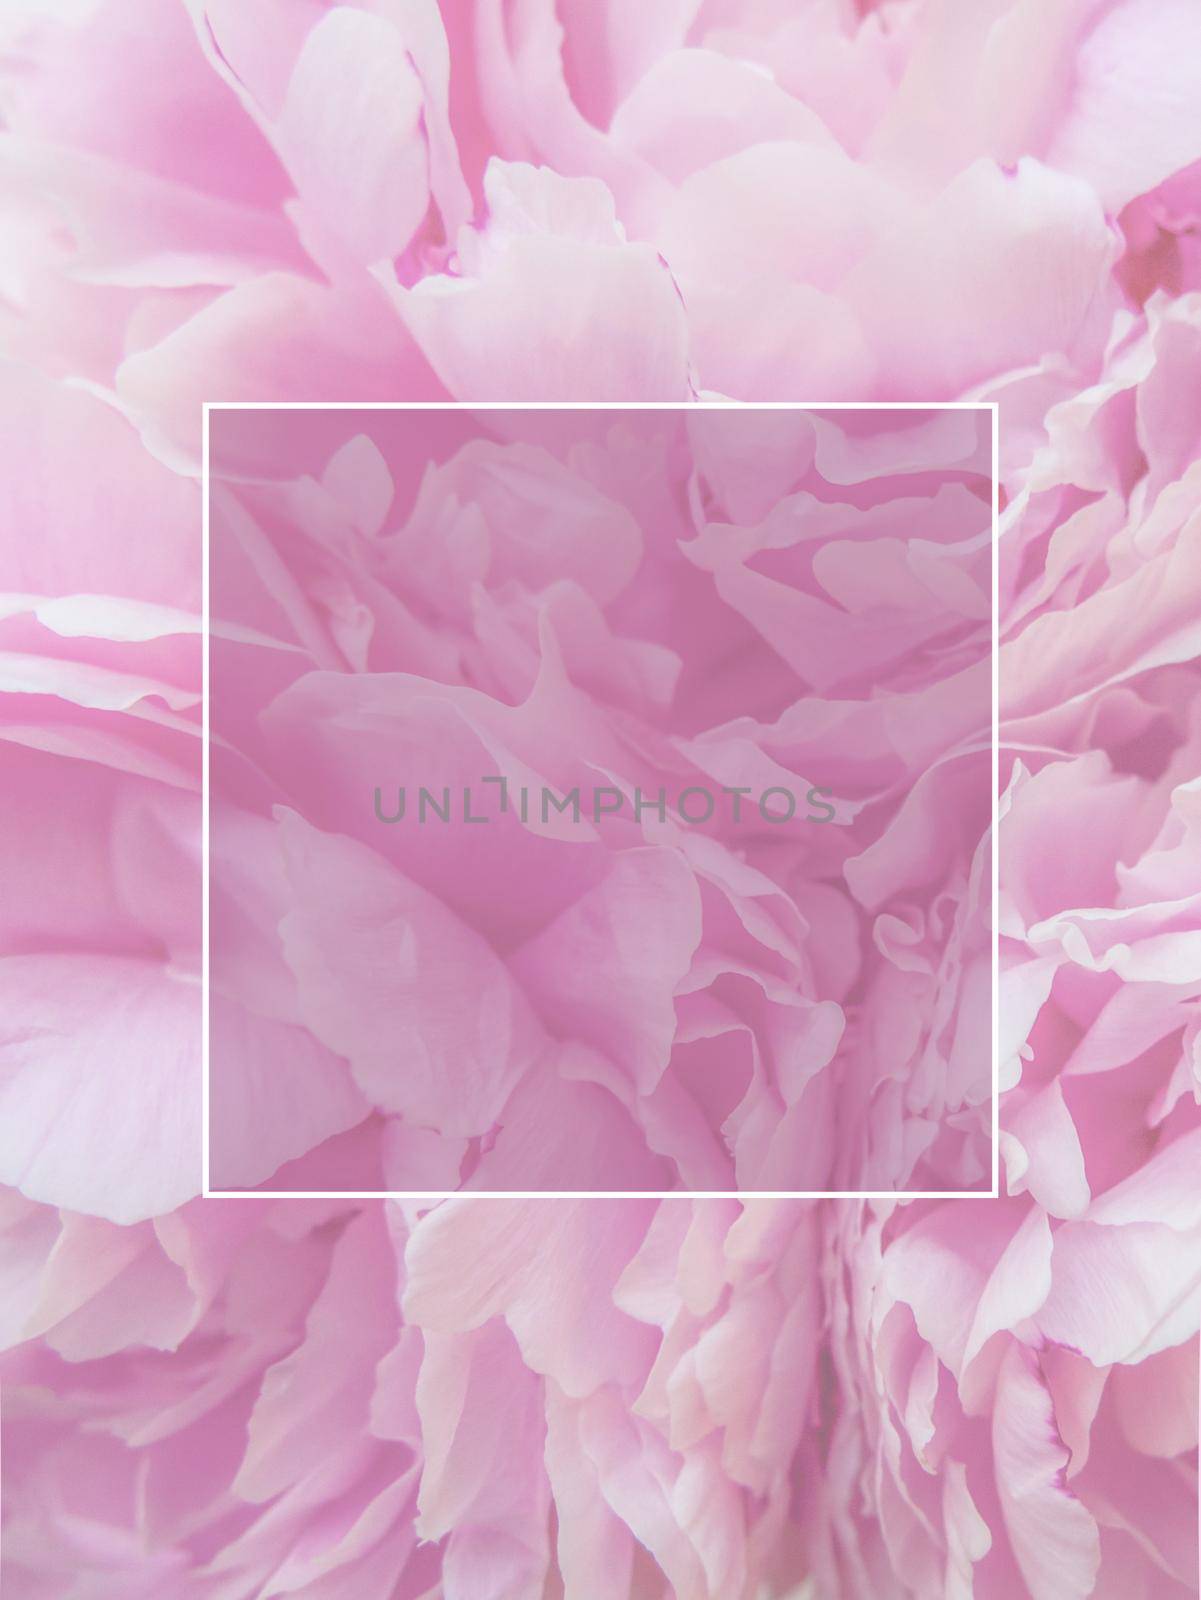 darkened frame on a background of pink peonies flowers, free space for your text by Andre1ns